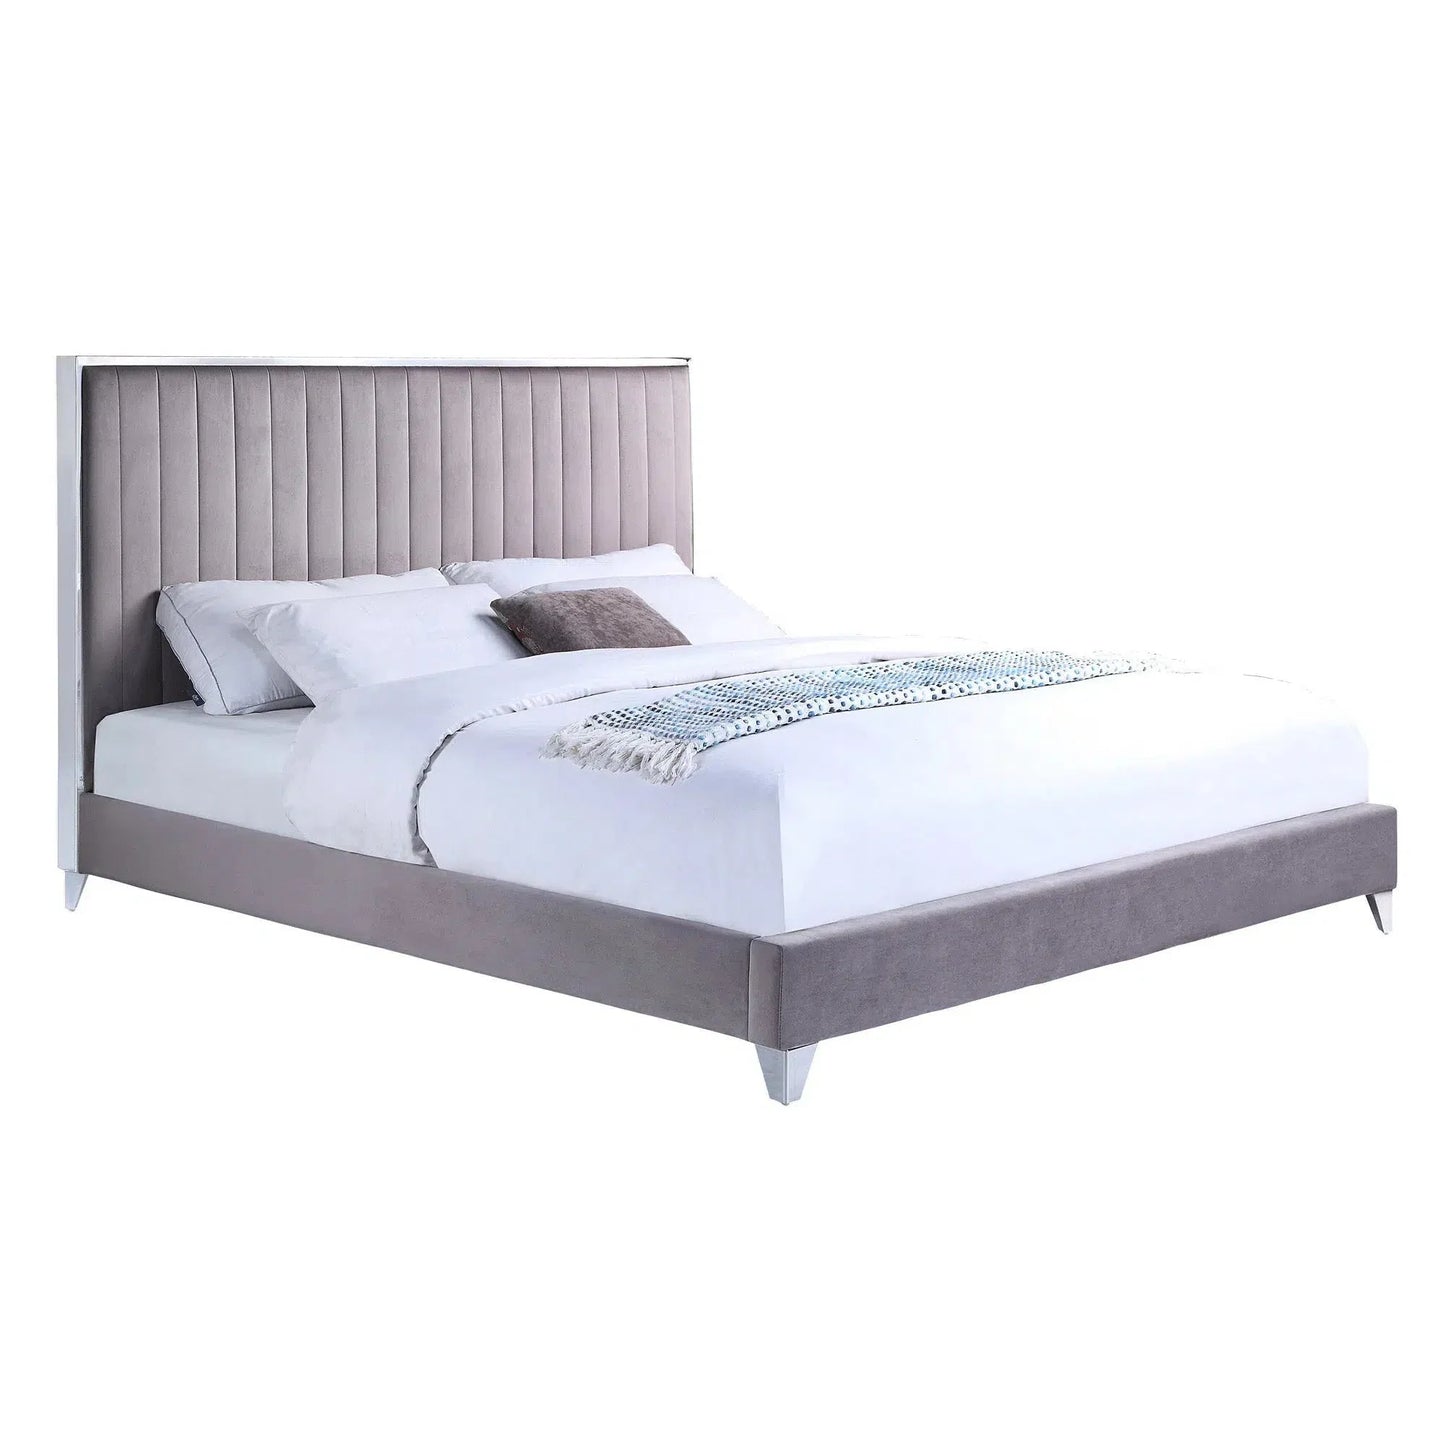 Silverdale Upholstered Fabric Bed-Sleep Doctor